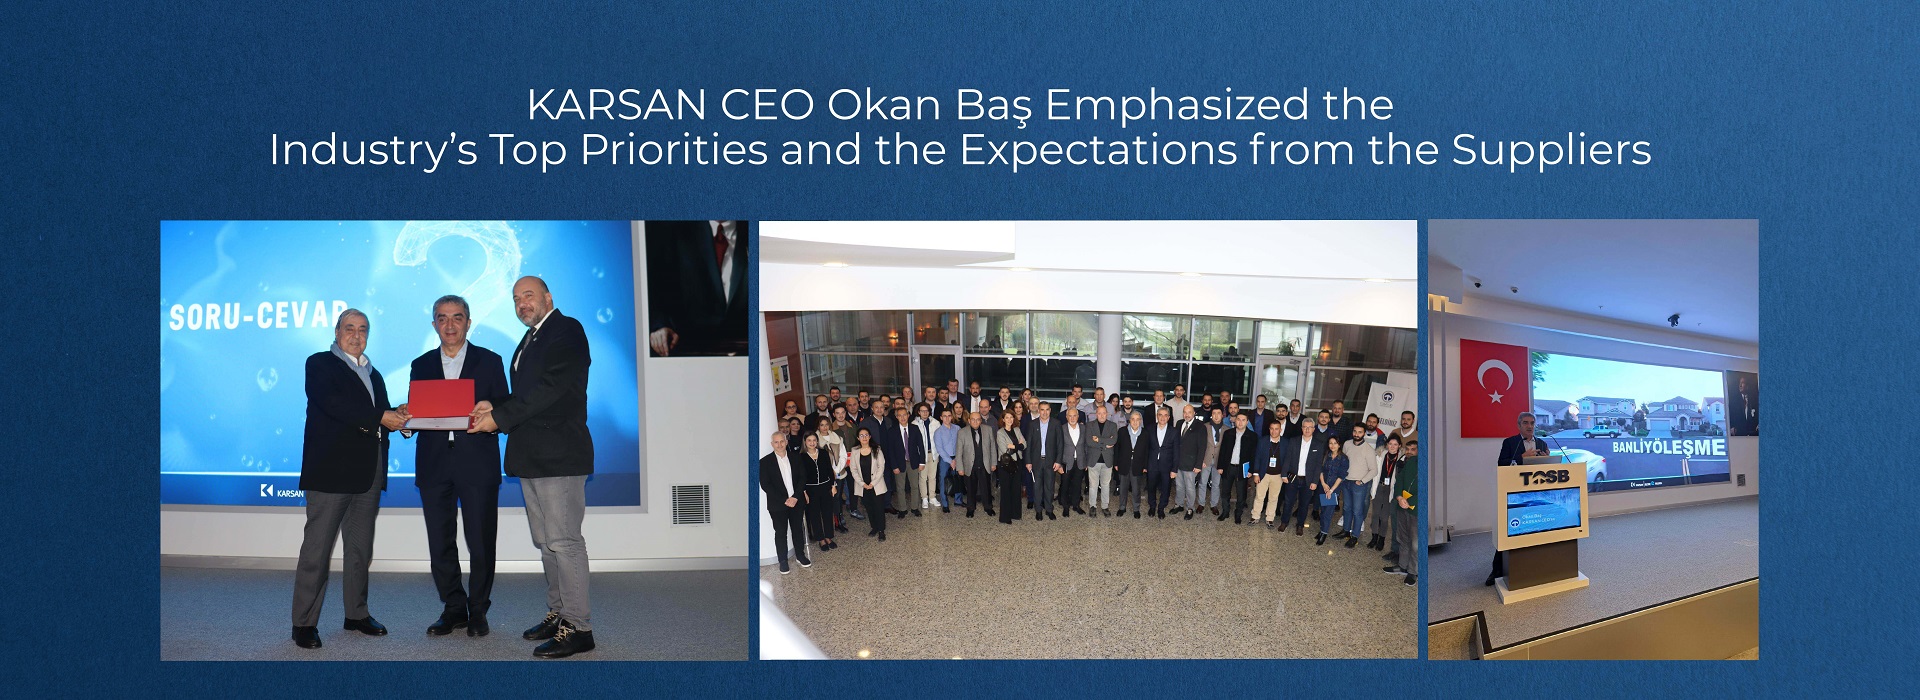 KARSAN CEO Okan Baş Emphasized the Industry’s Top Priorities and the Expectations from the Suppliers